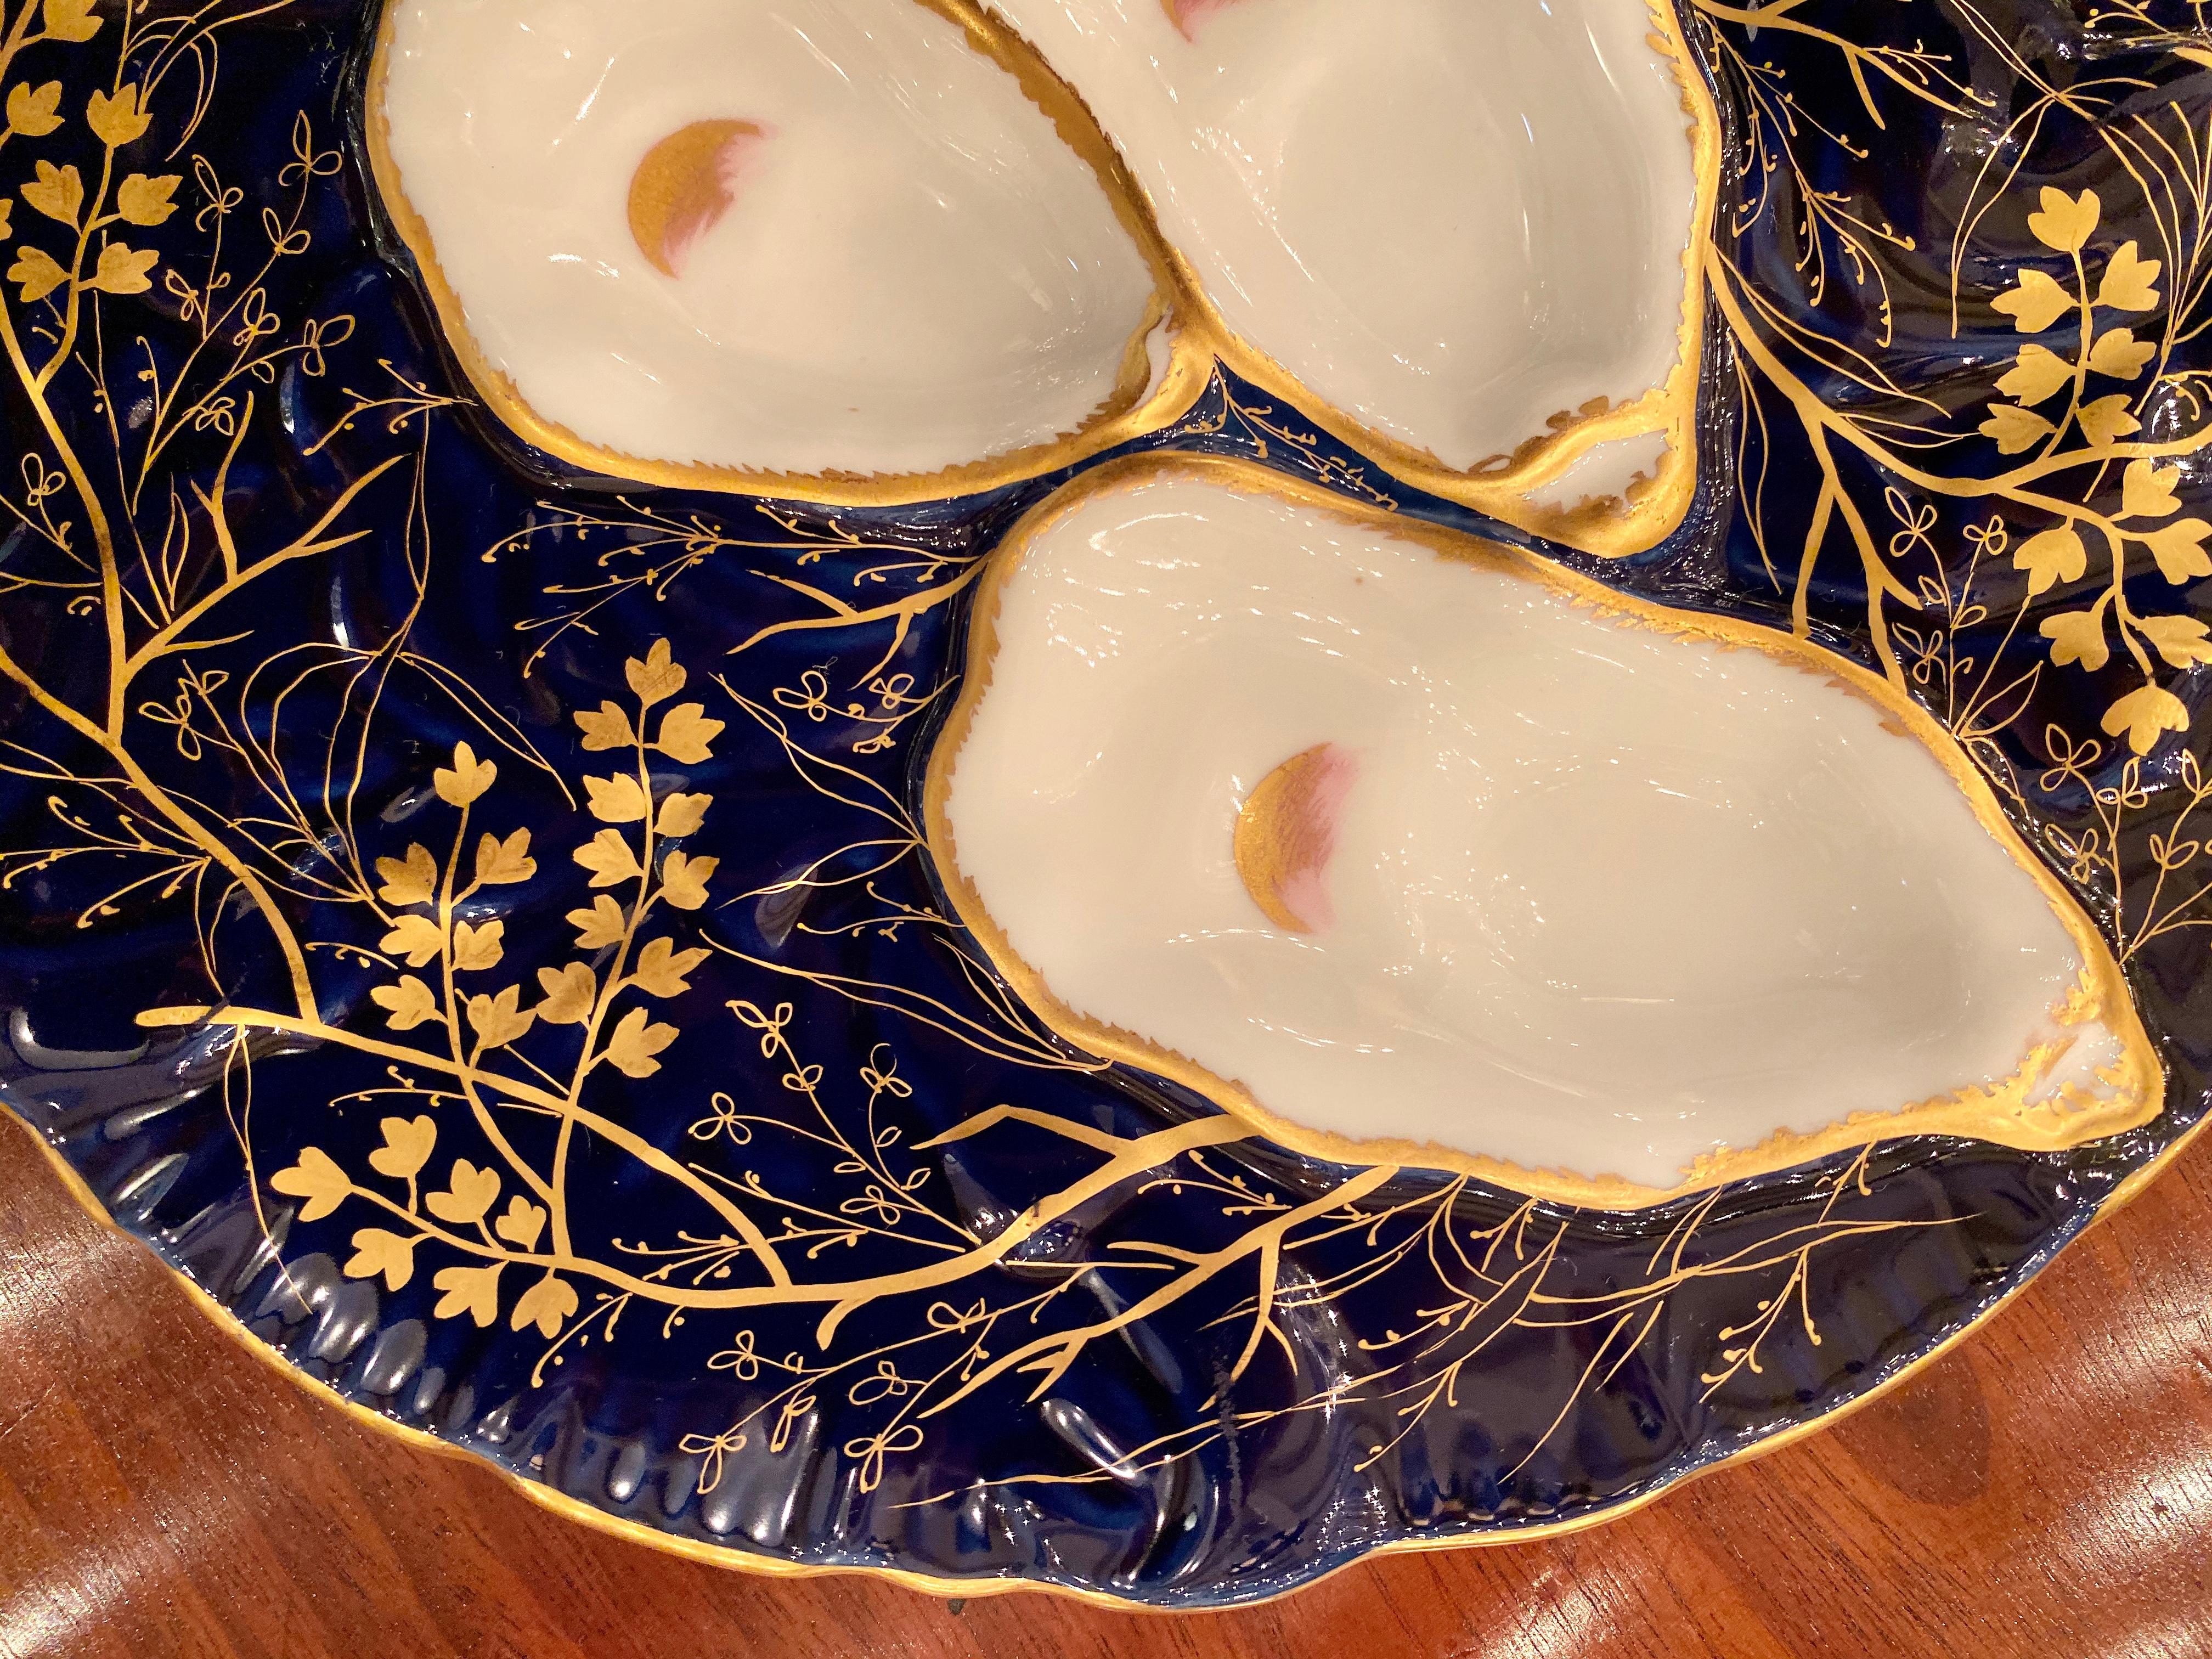 Antique French Limoges Porcelain Turkey pattern oyster plate, circa 1880s. Beautiful cobalt color with gold accents.